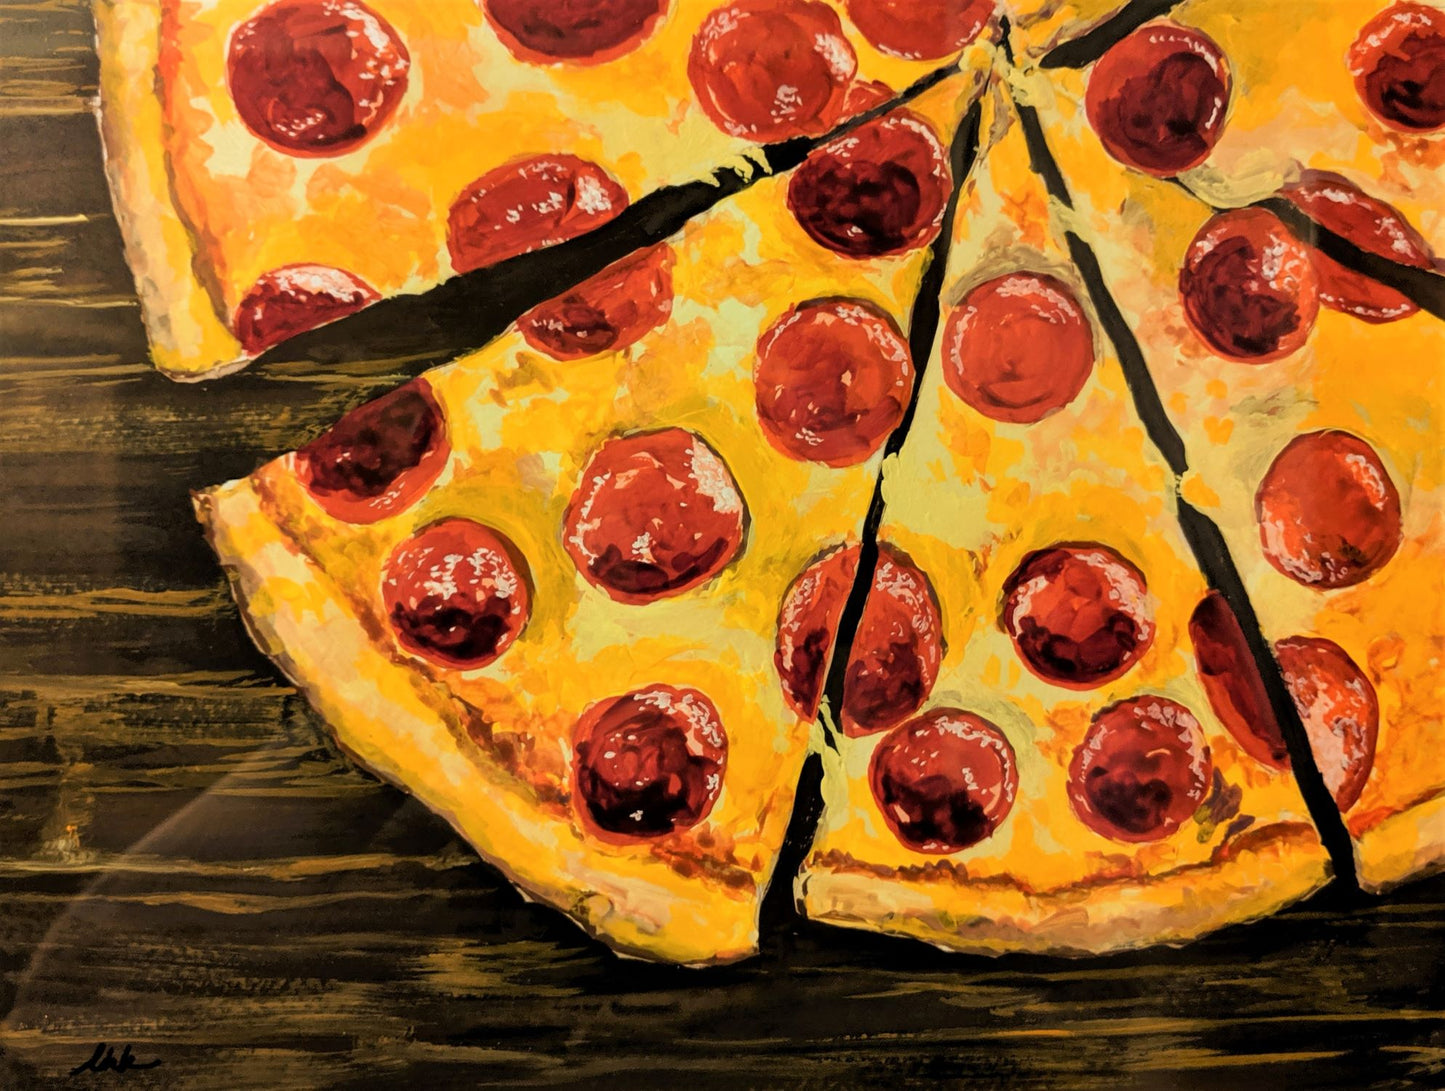 Pepperoni pizza gouache painting